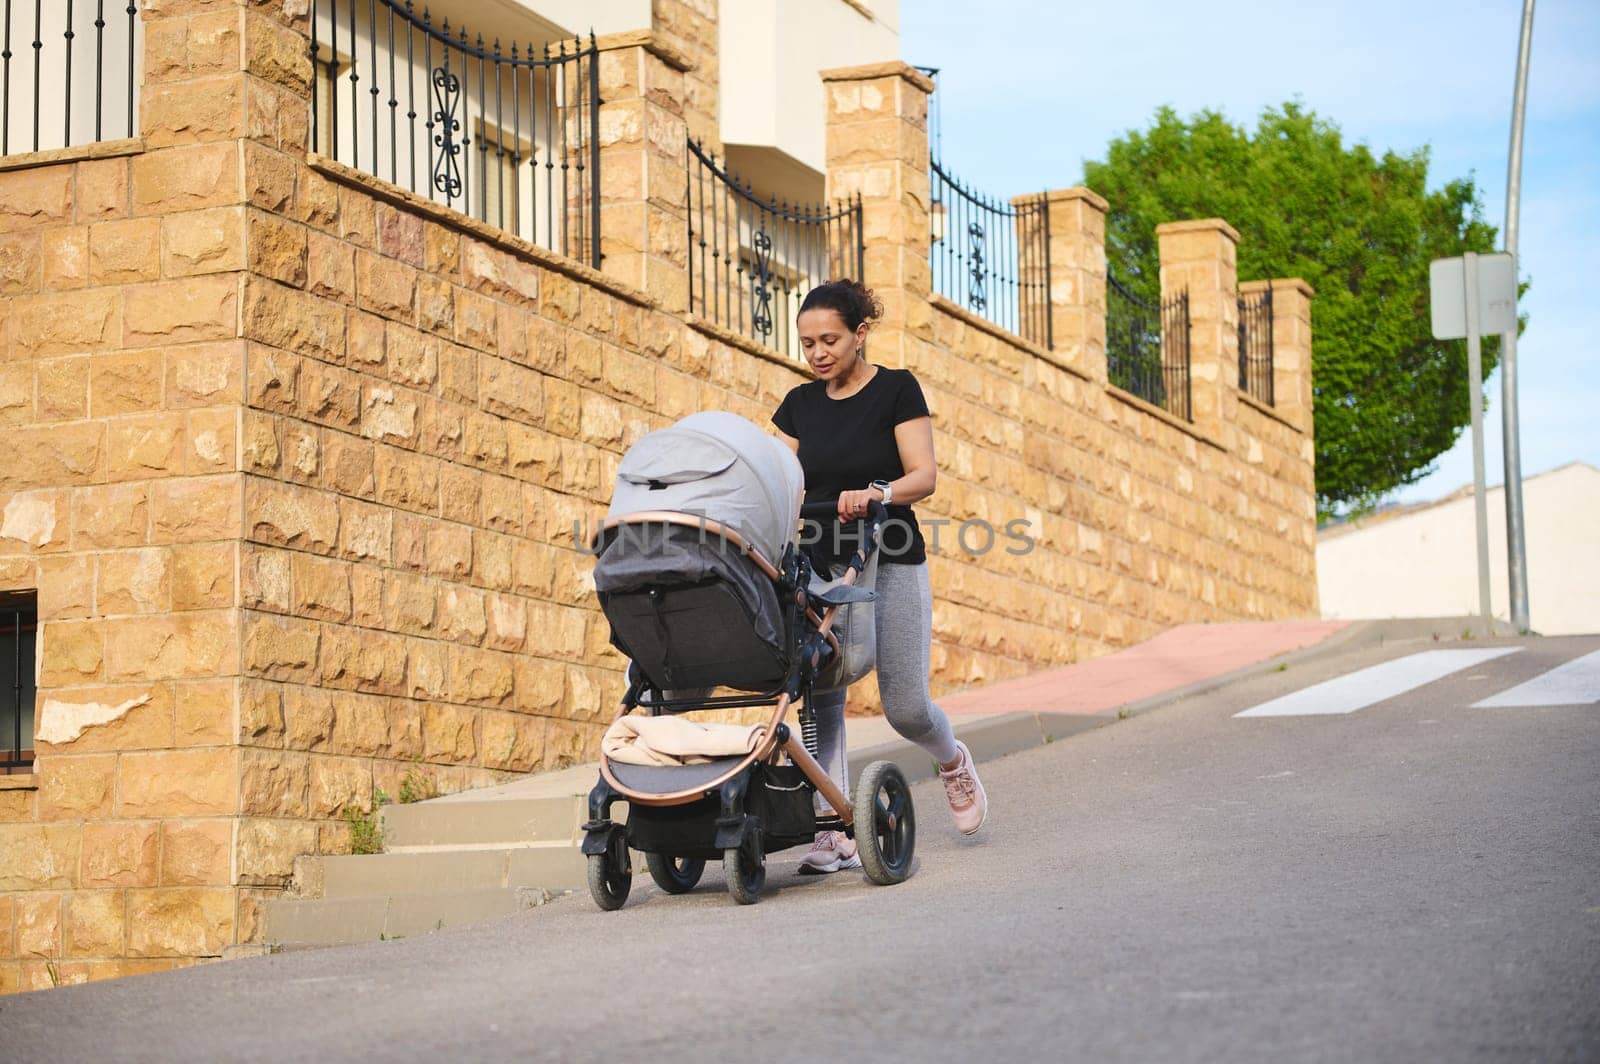 Smiling young woman in black t-shirt and gray sports leggings, pushing baby buggy while exercising outdoors. People. Maternity and infancy. Fitness with baby. Active and healthy lifestyle concept by artgf